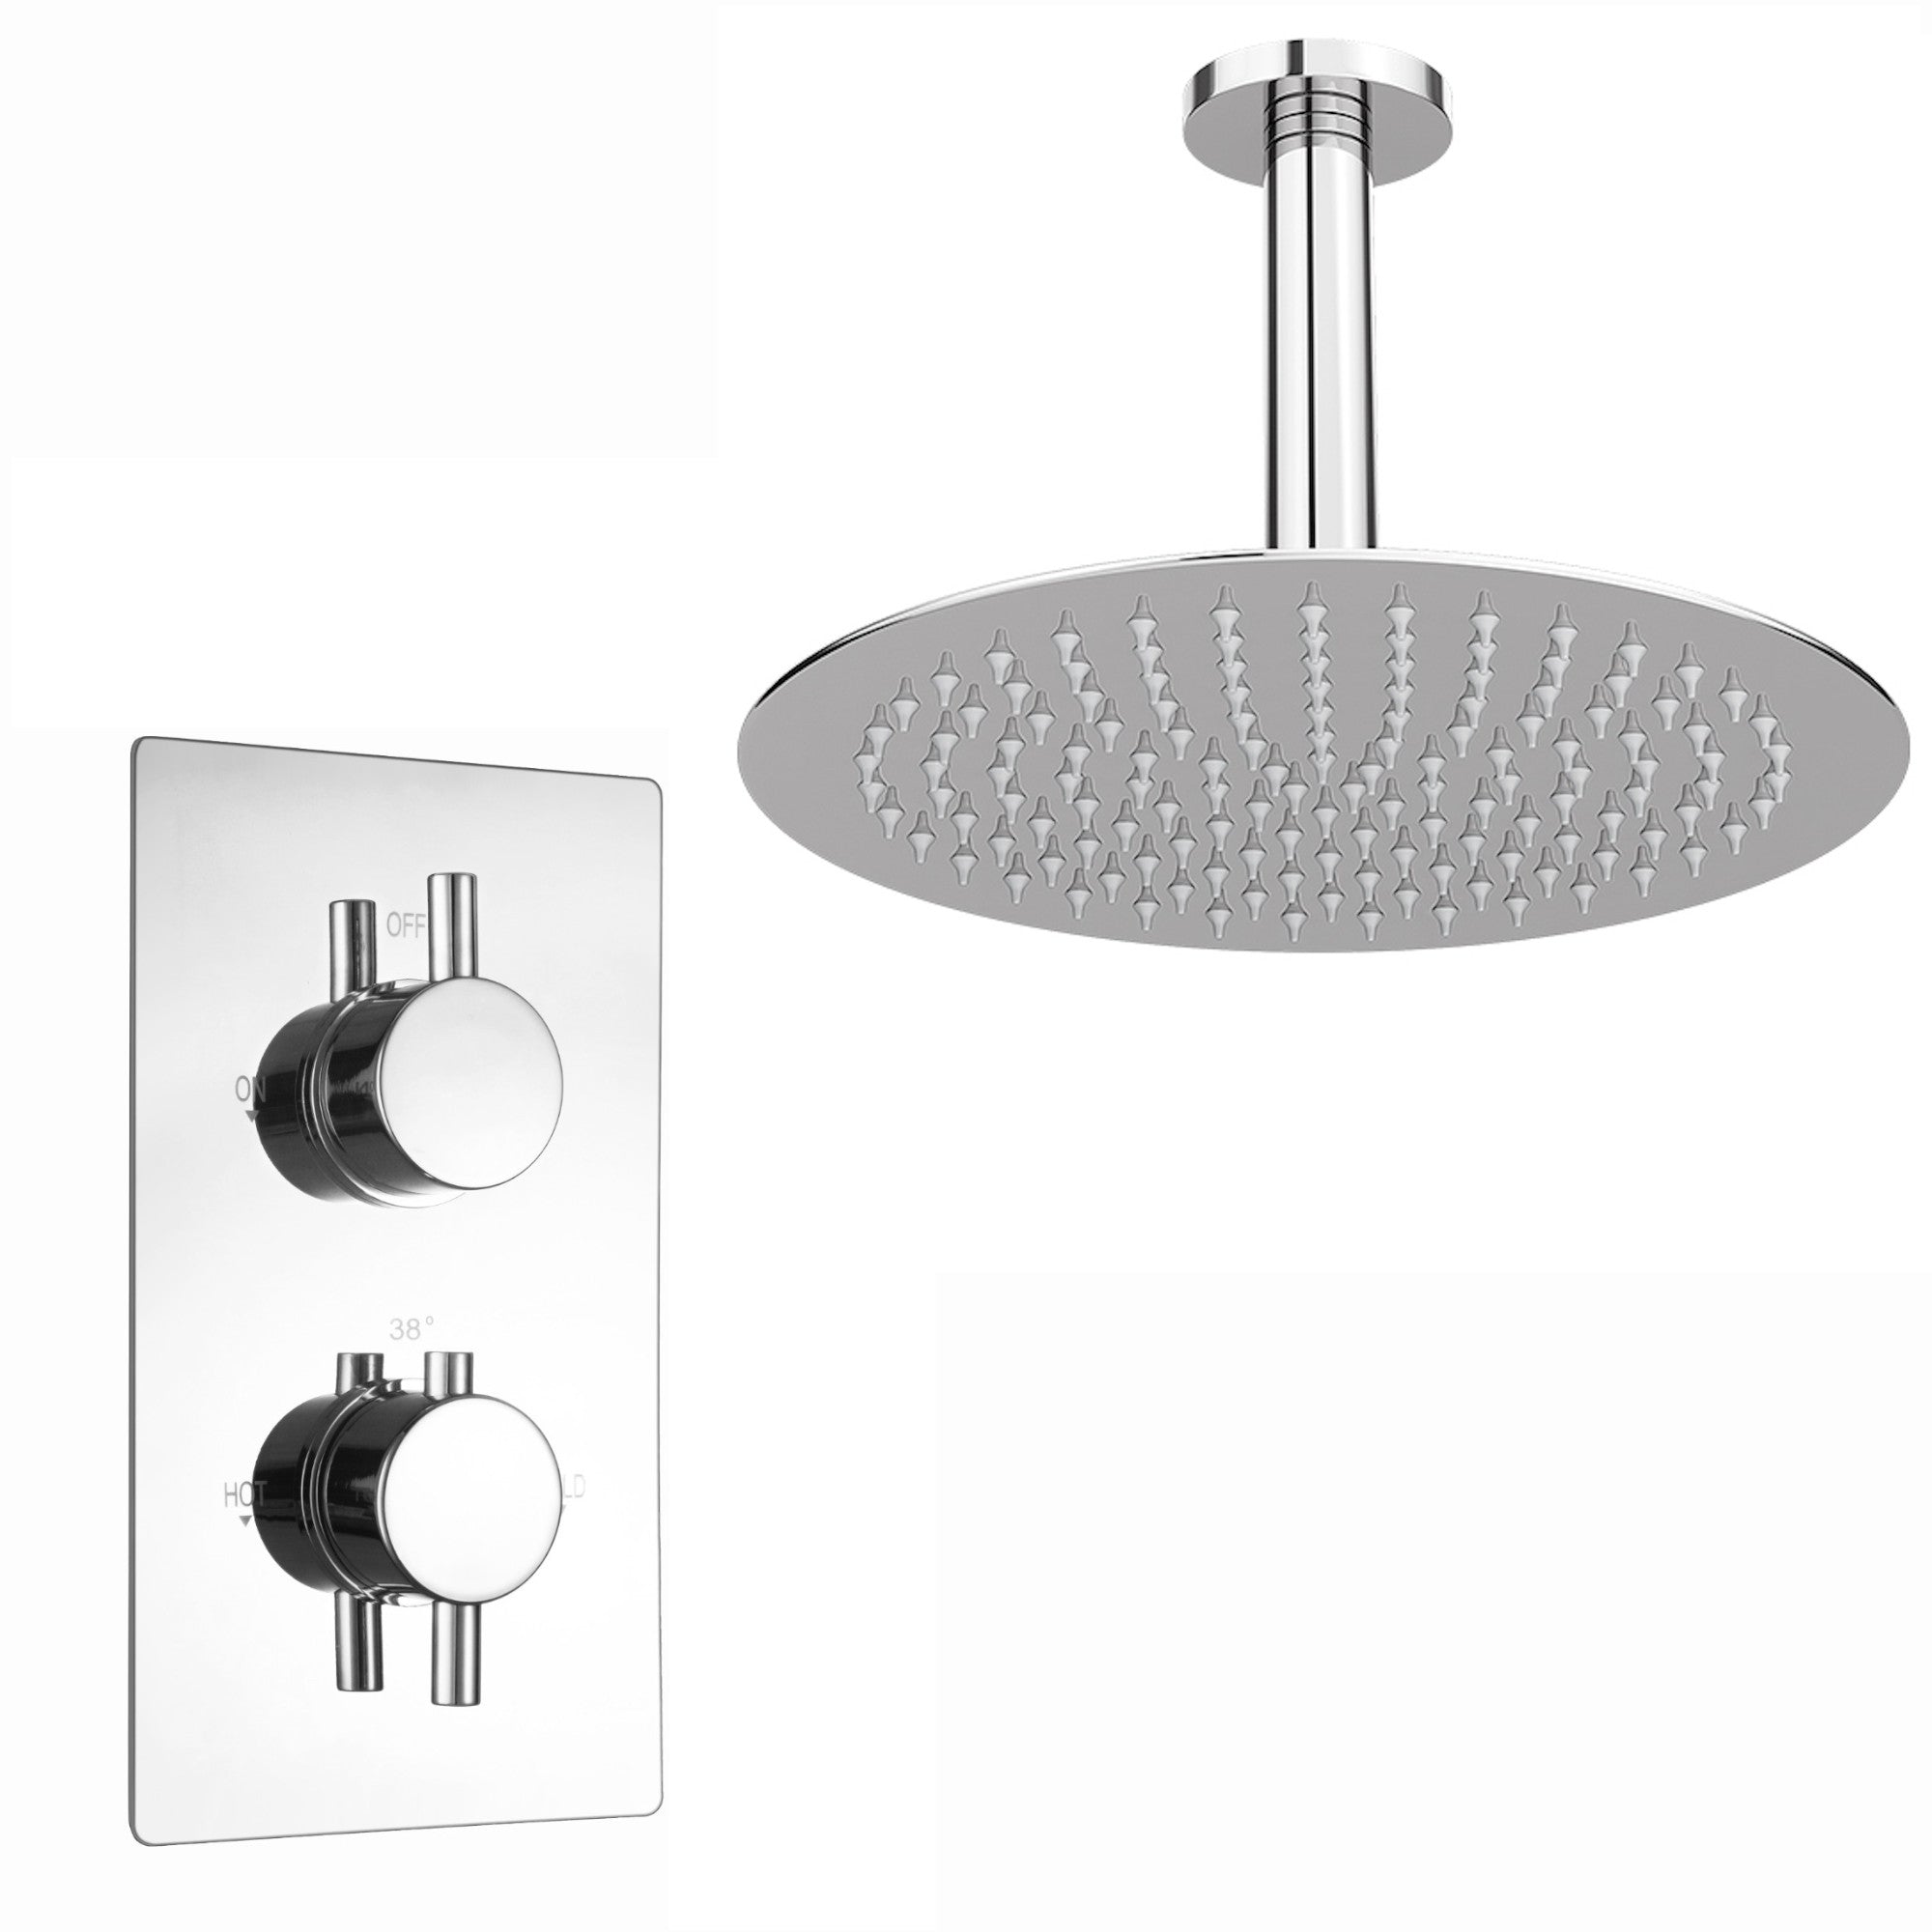 Venice Contemporary Round Concealed Thermostatic Shower Set Ceiling Fixed 8" Shower Head - Chrome (1 Outlet)